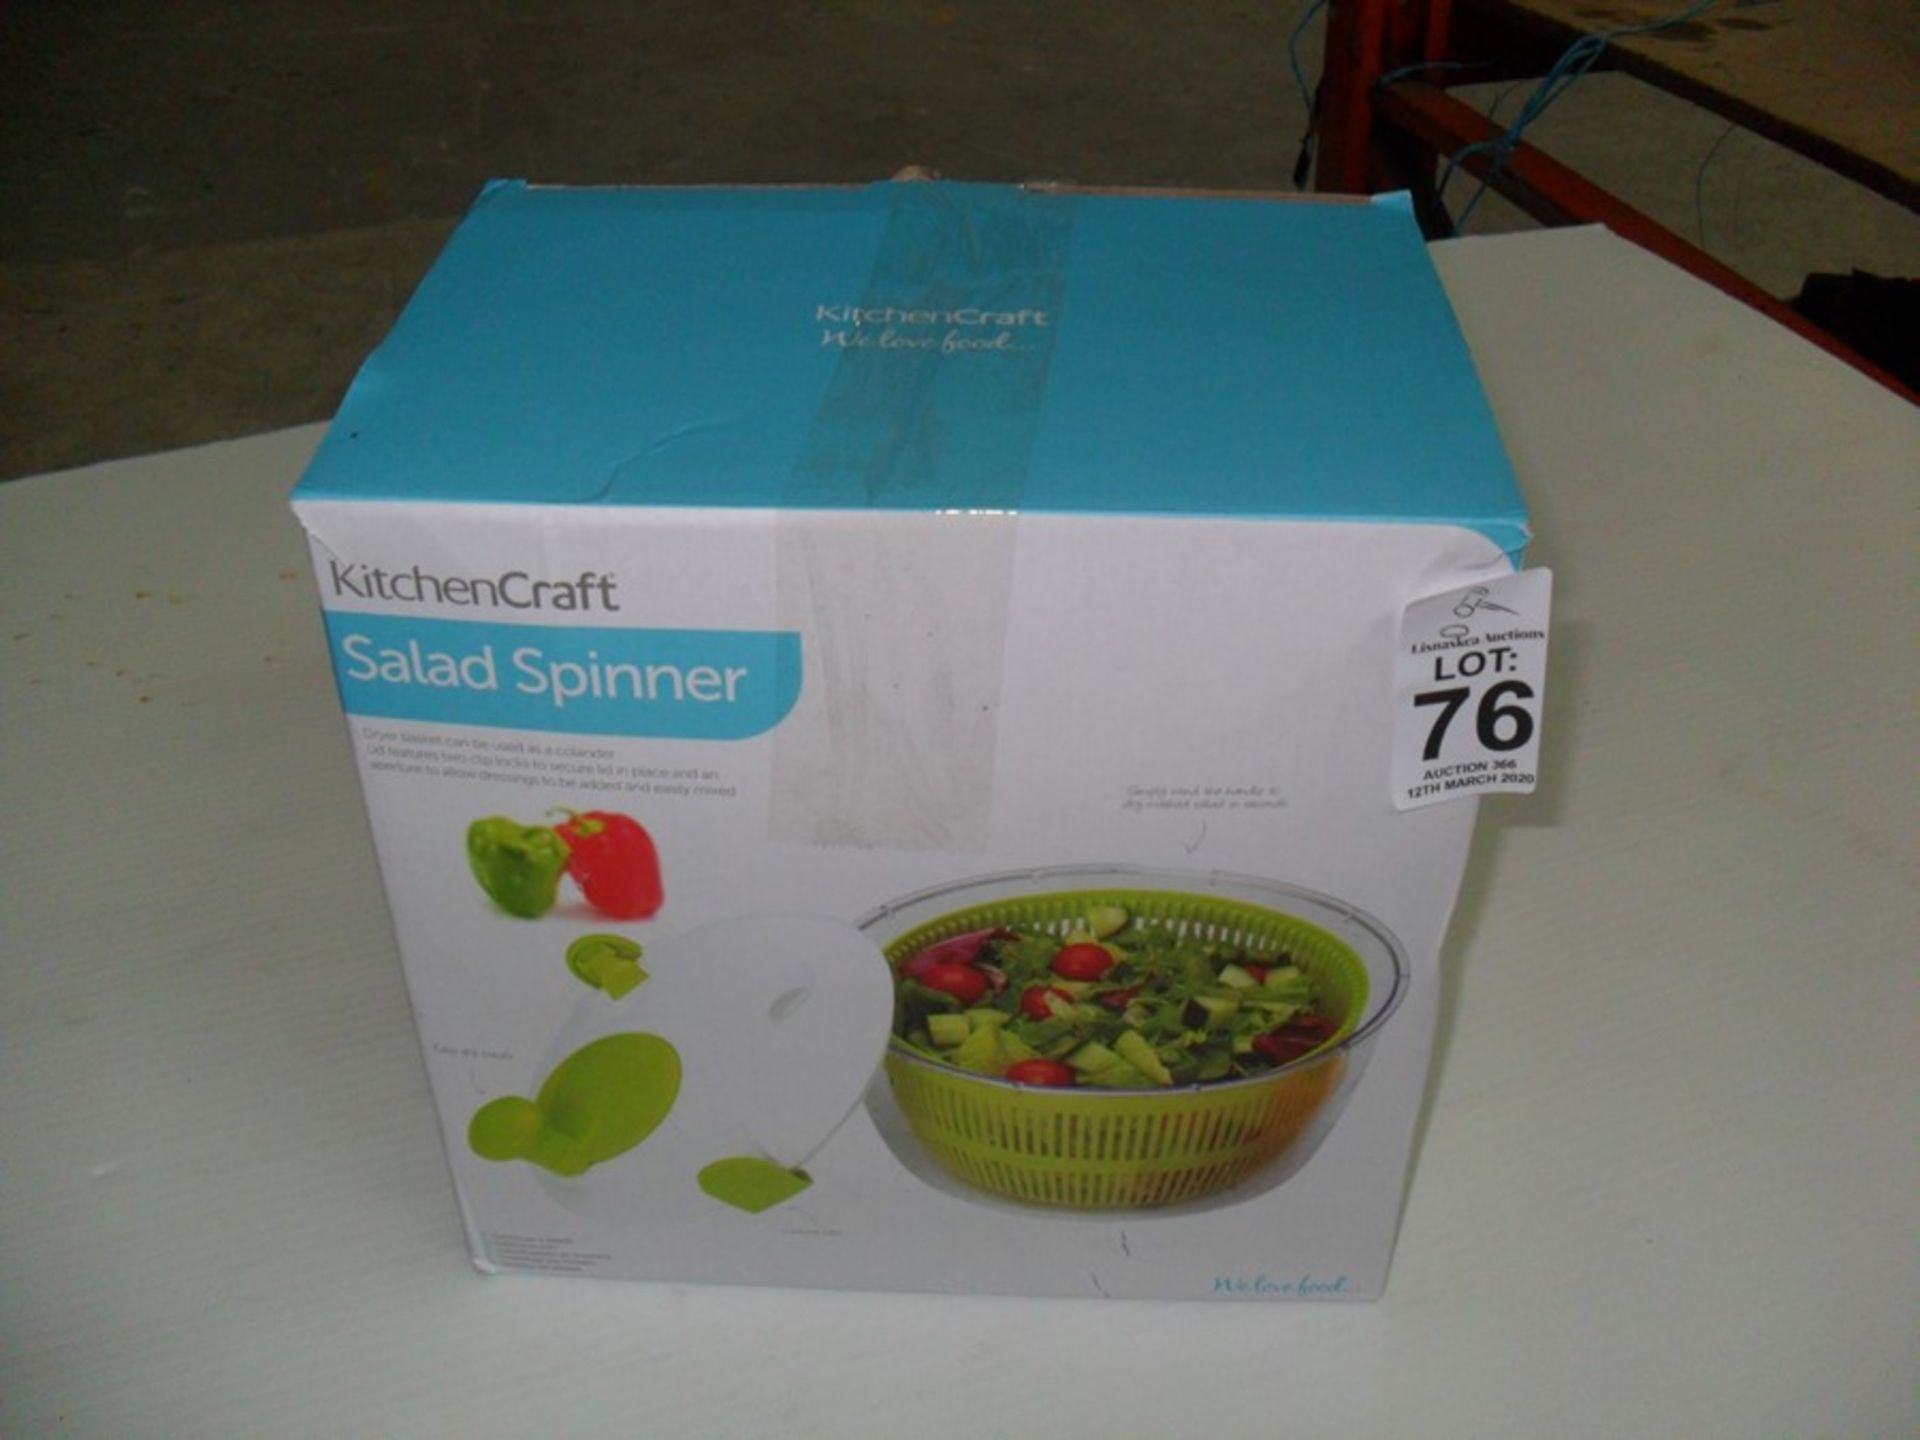 KITCHCRAFT SALAD SPINNER (SHOP CLEARANCE)